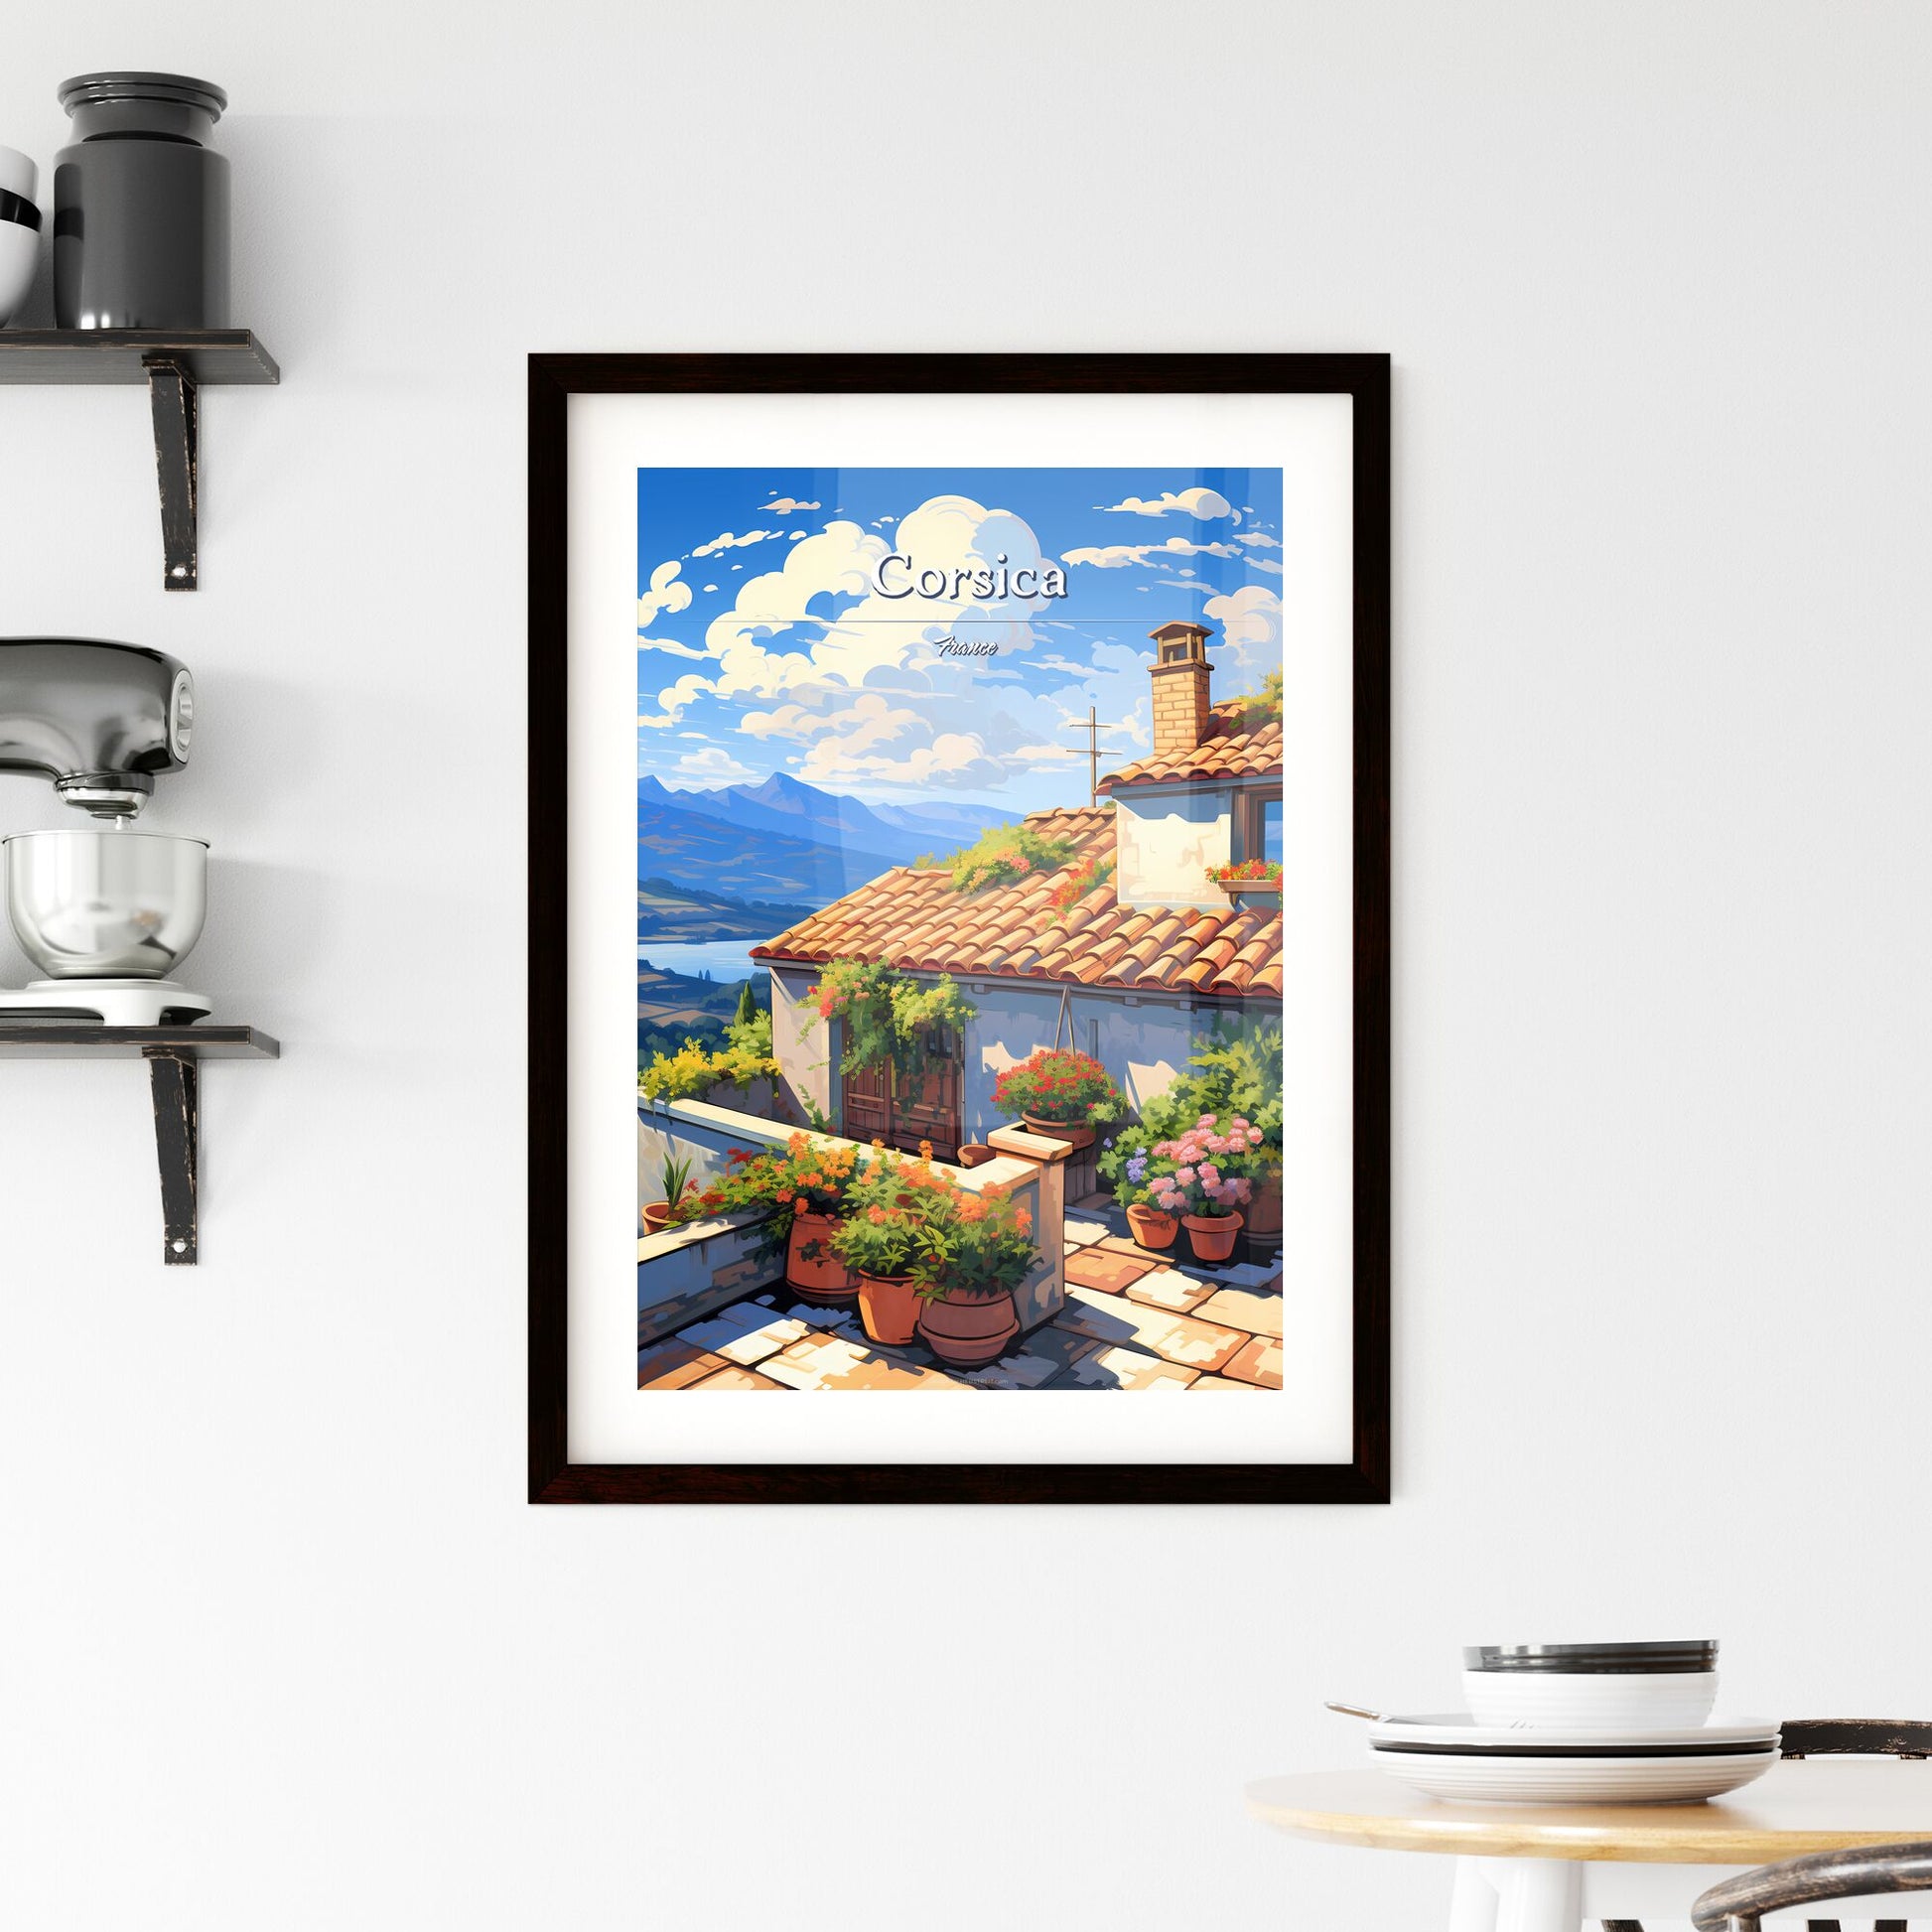 On the roofs of Corsica, France - Art print of a house with plants on the roof Default Title